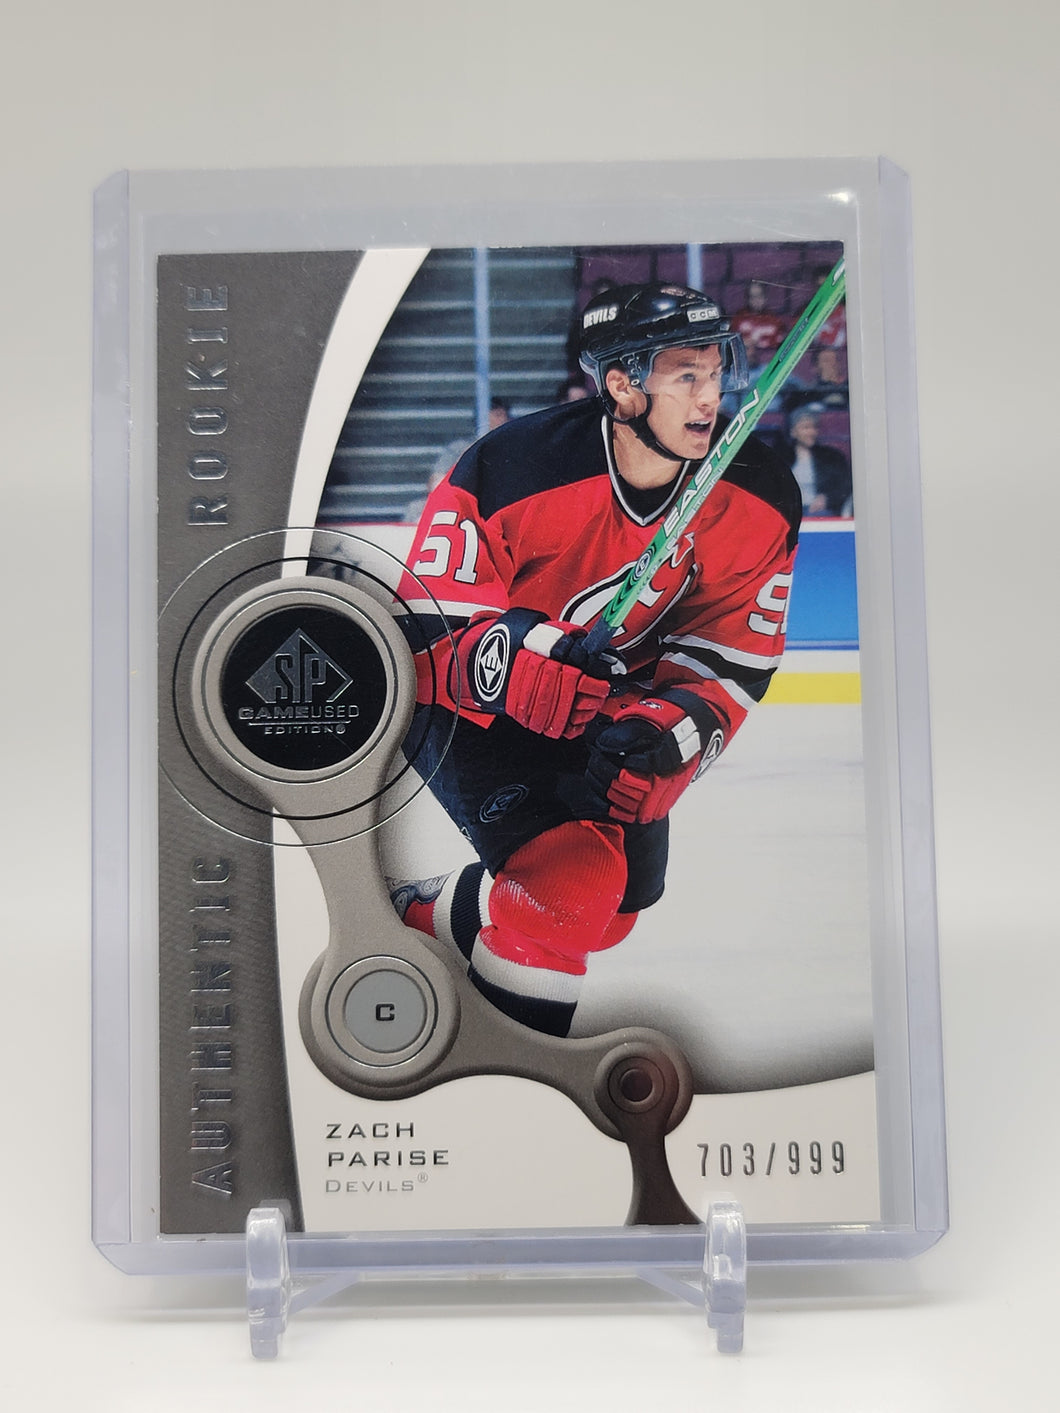 Zach Parise 2006 SP Game Used Authentic Rookie 142 #703/999  S4987